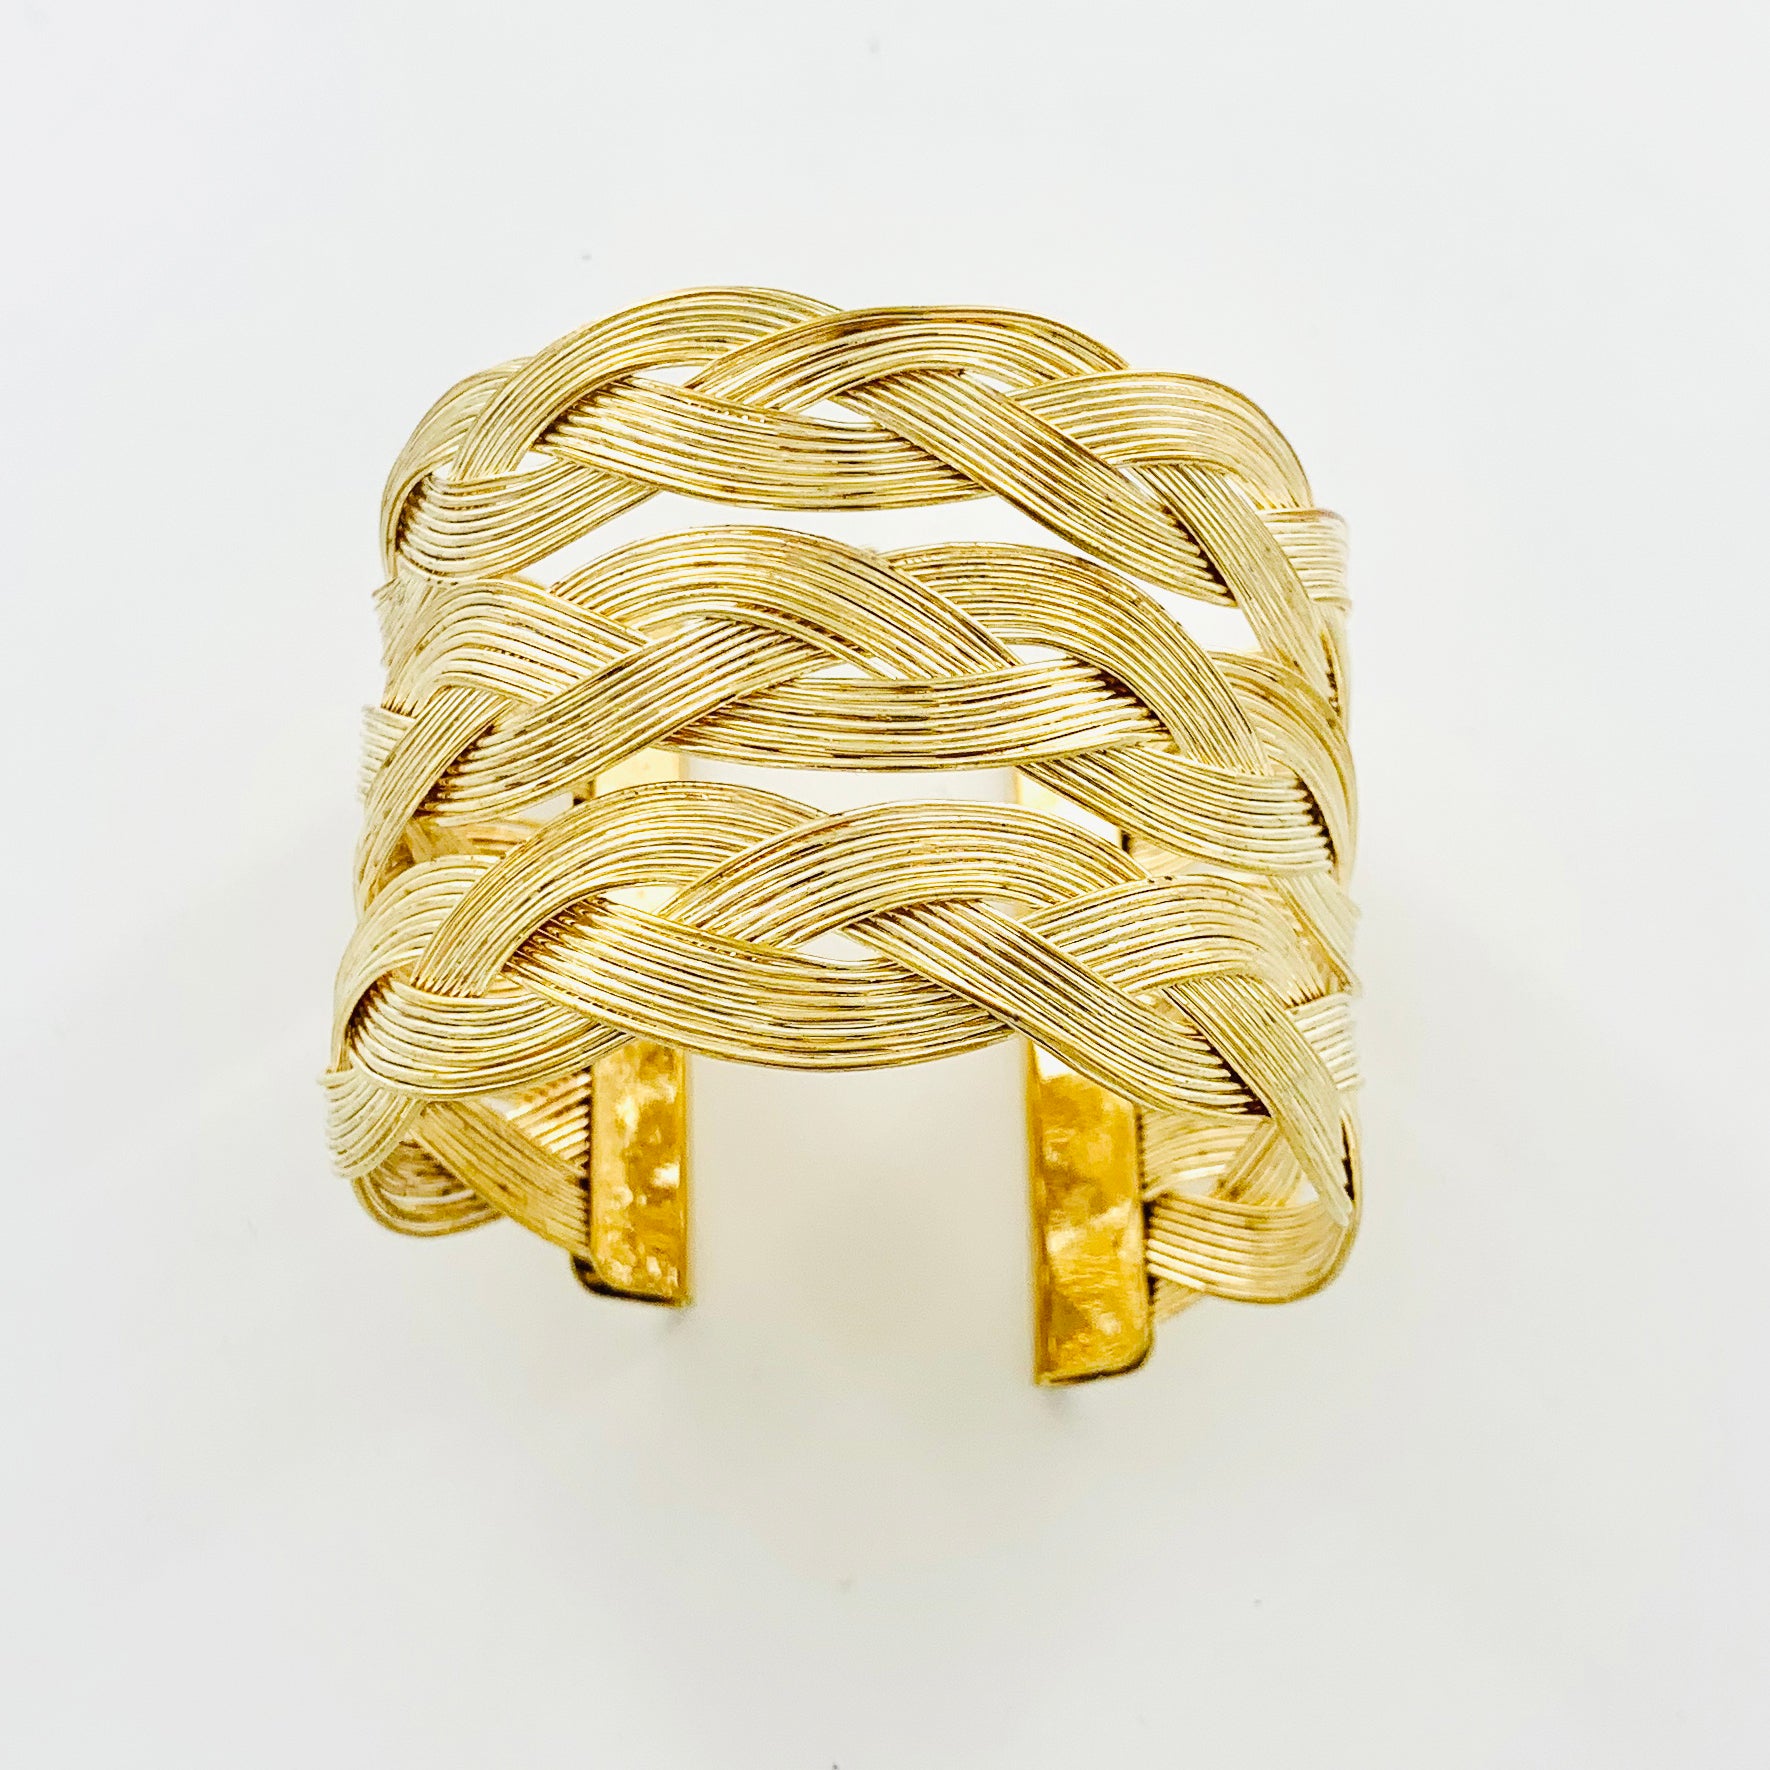 Gold Bangles with wavy weaved pattern